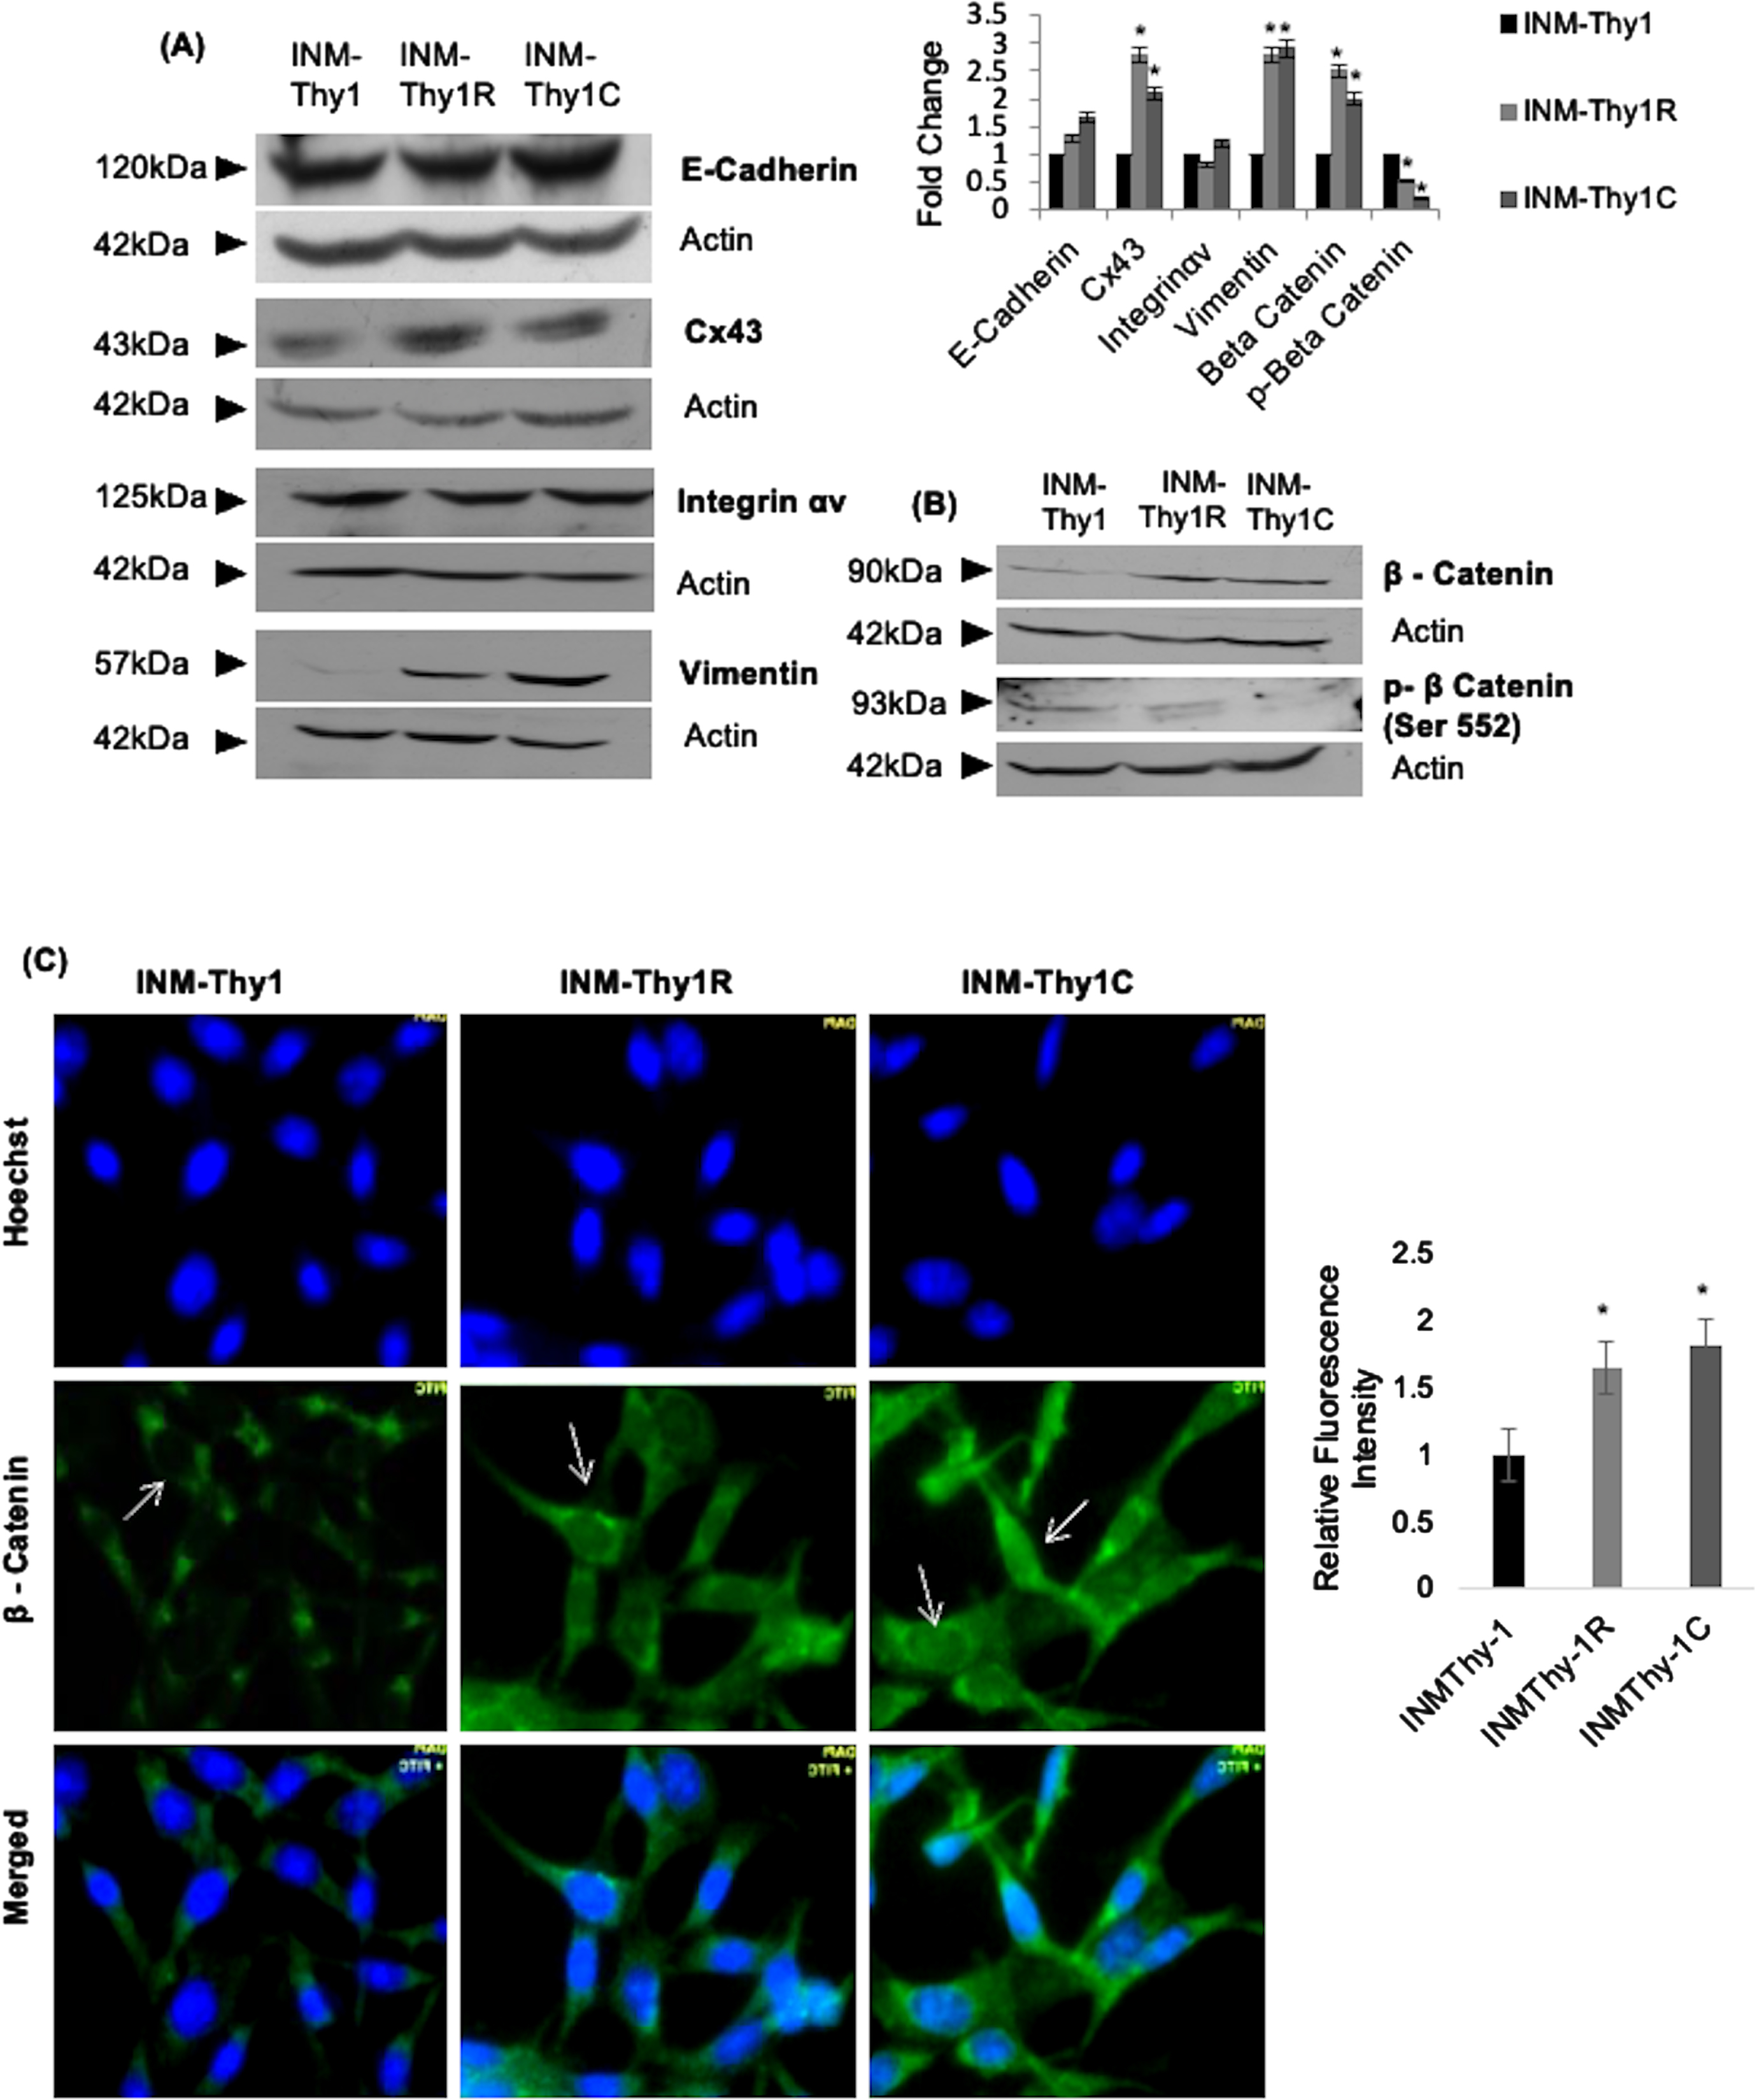 Alterations in expression and intracellular localization of cell adhesion proteins following transformation: (a) Western blot analysis of the expression of the indicated cell adhesion proteins. Representative blots and densitometry of protein bands relative to β-actin from three independent experiments are shown (*P≤0.05). (b) Representative western blots of β-catenin and phospho- β-catenin indicate activation of Wnt pathway in the transformed cells. (c) Immunofluorescence images showing intracellular localization (arrows) of β-catenin (magnification 63X). Relative fluorescence intensity of FITC-labeled nuclear region of the three cell strains, representing nuclear localization of β-catenin (right panel). A total of 50 randomly selected cells from at least 10 images per strain were analysed using Zen 2.3 pro software. Representative images of three independent experiments are shown.